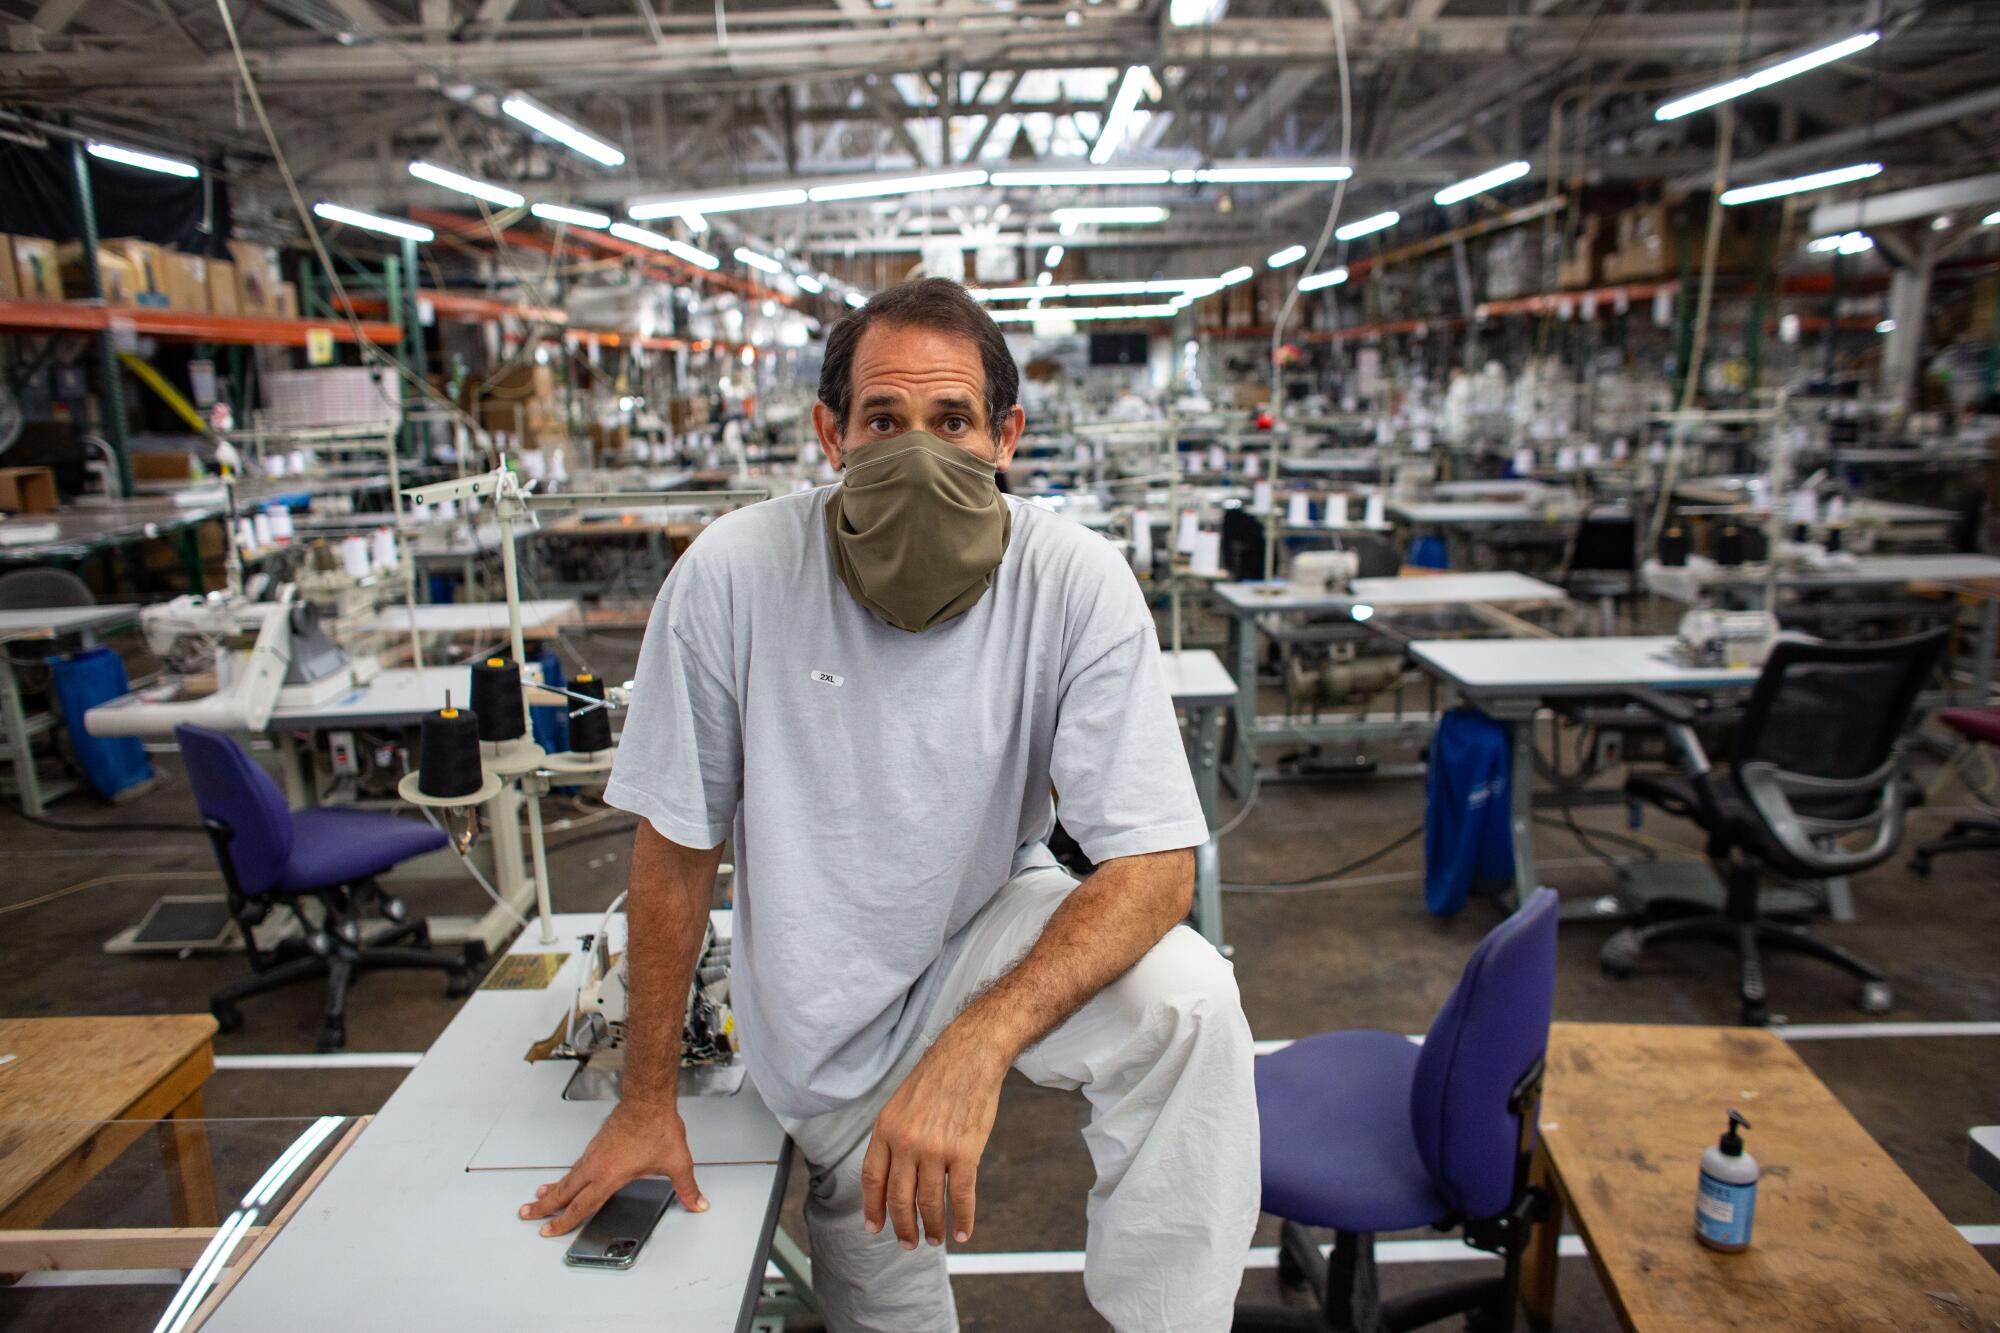 Dov Charney in a face covering in a room with tables and chairs behind him.